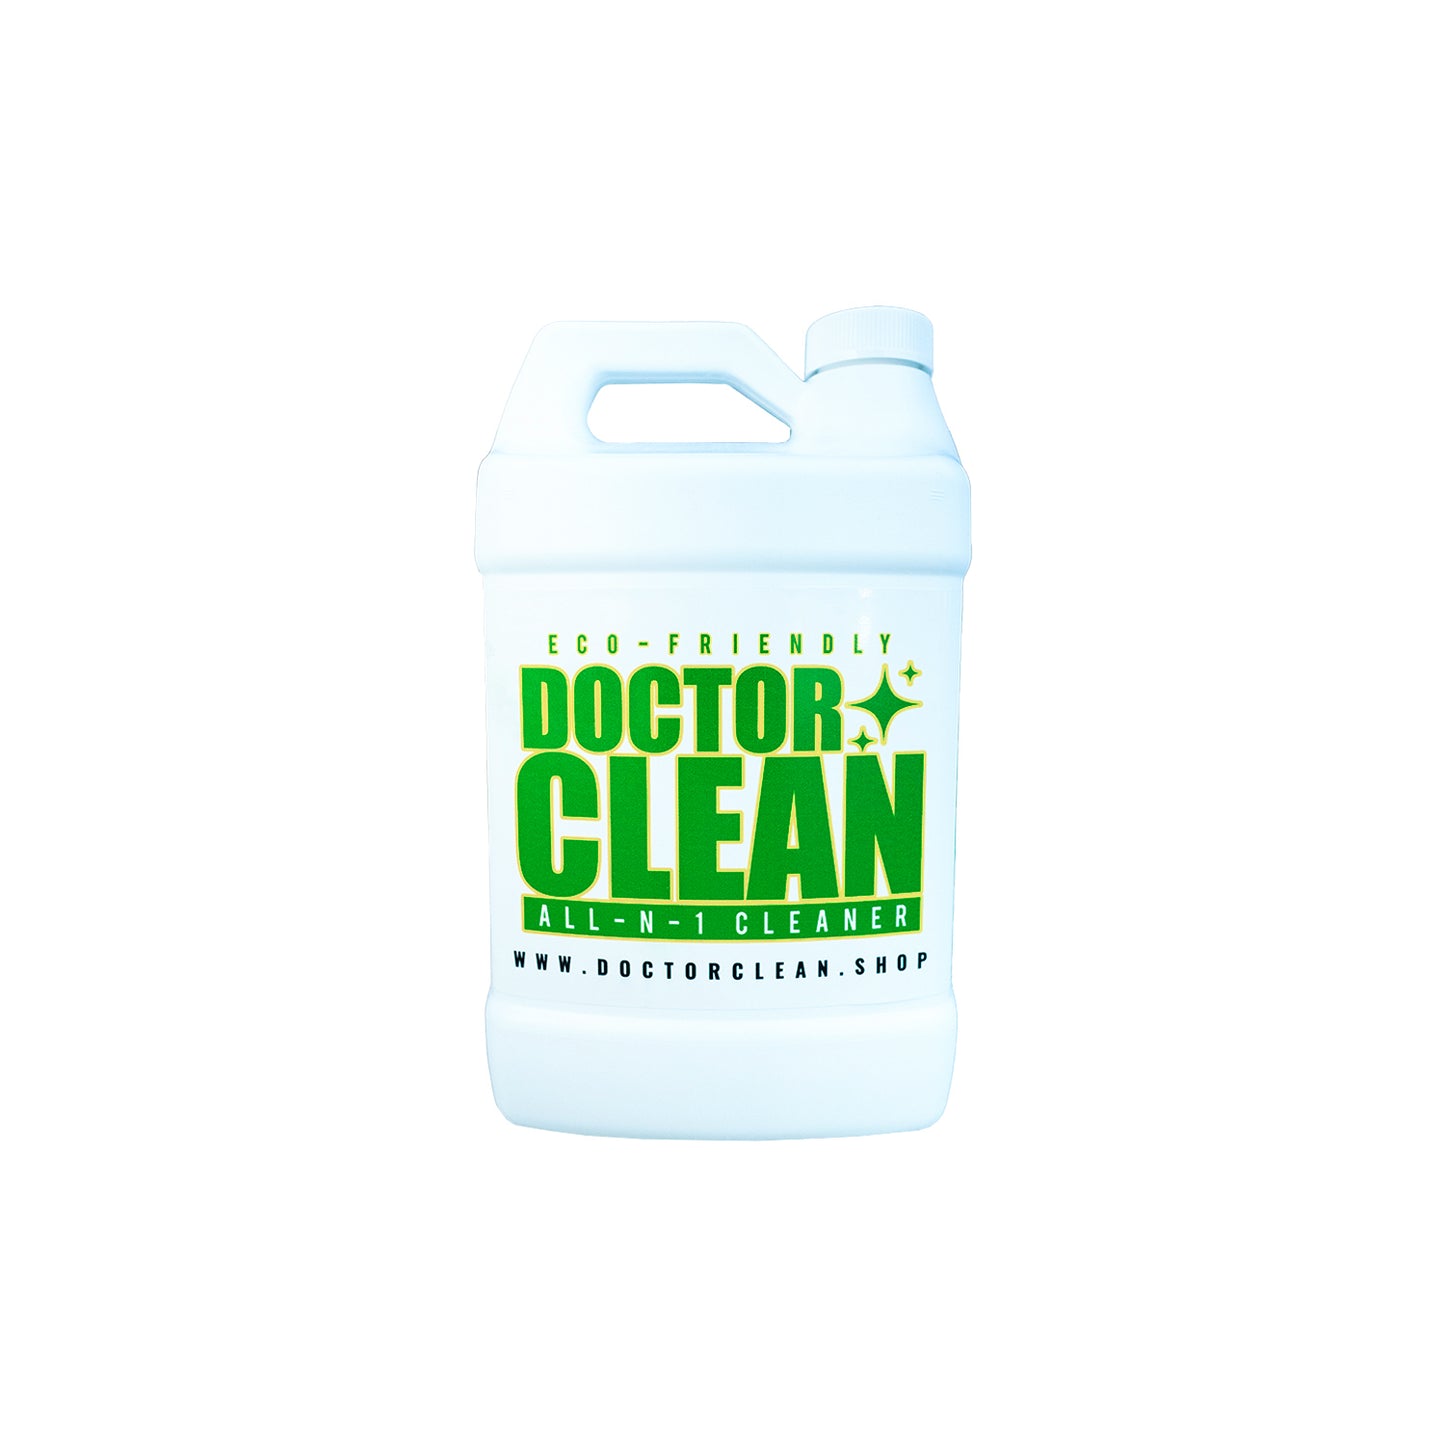 Doctor Clean: All-N-1 Cleaner Gallon